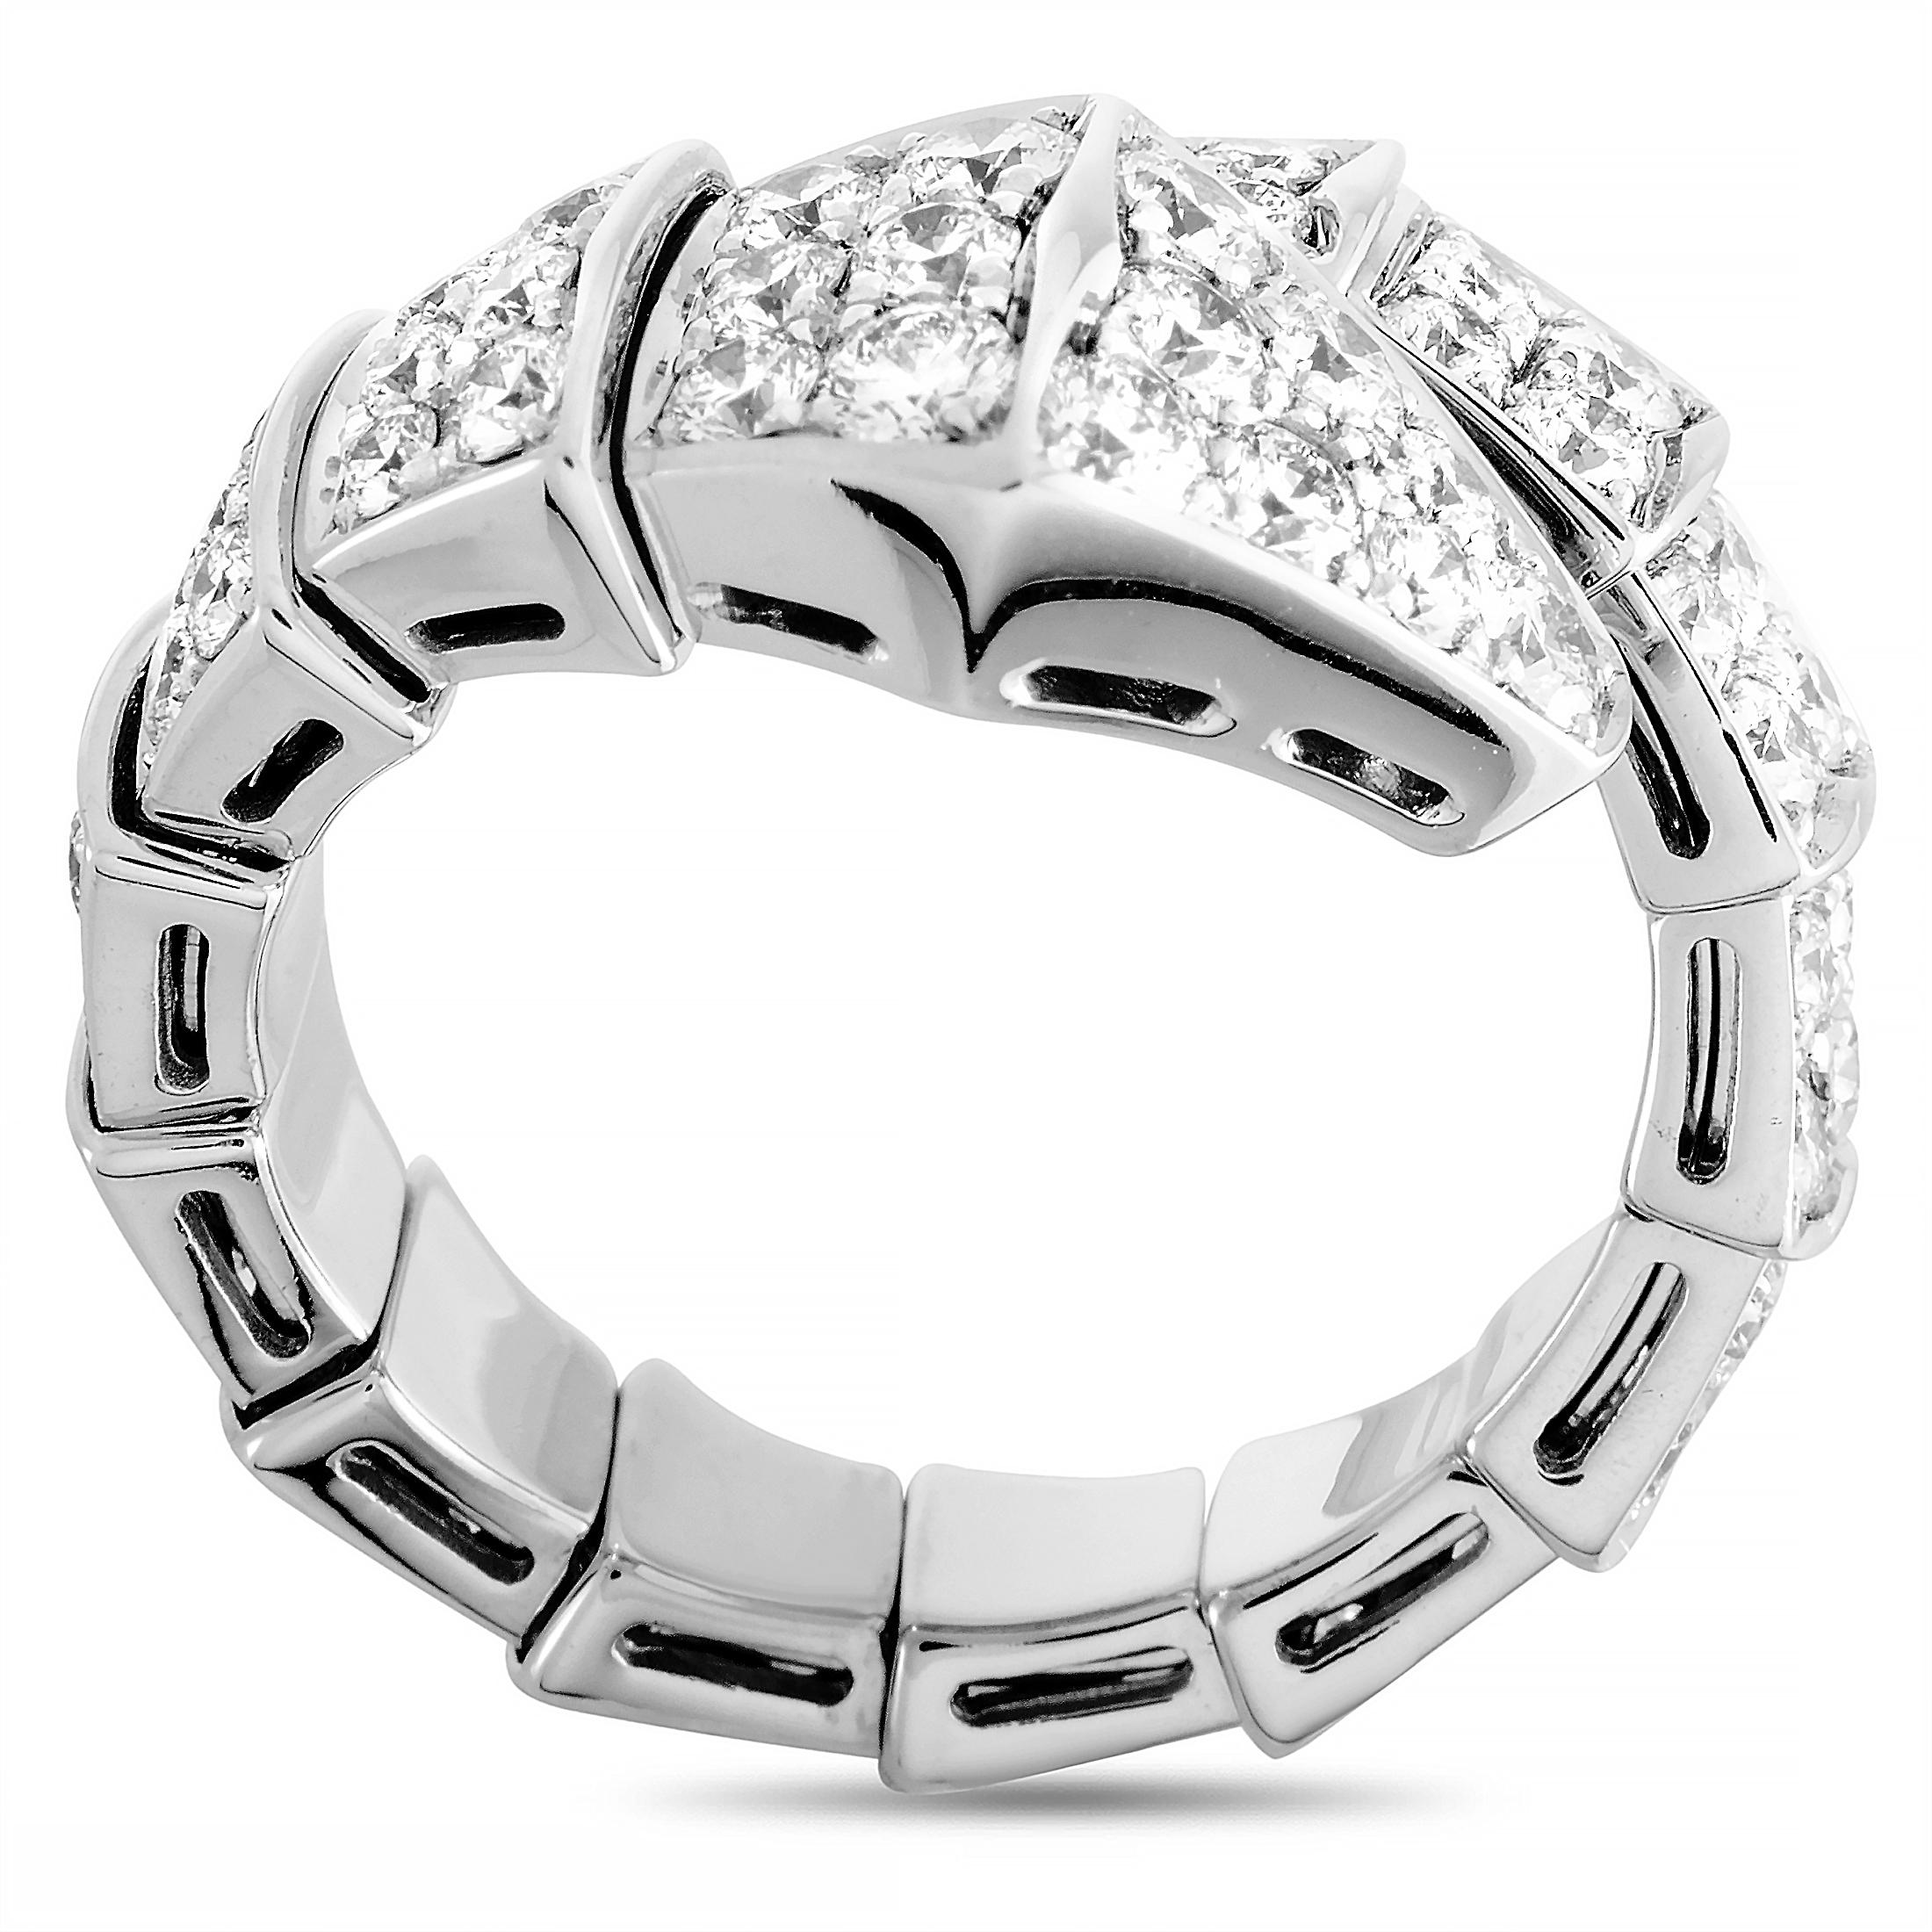 The Bvlgari “Serpenti” ring is made out of 18K white gold and diamonds and weighs 8.7 grams. The ring boasts band thickness of 5 mm and top height of 5 mm, while top dimensions measure 13 by 20 mm.

This jewelry piece is offered in brand new